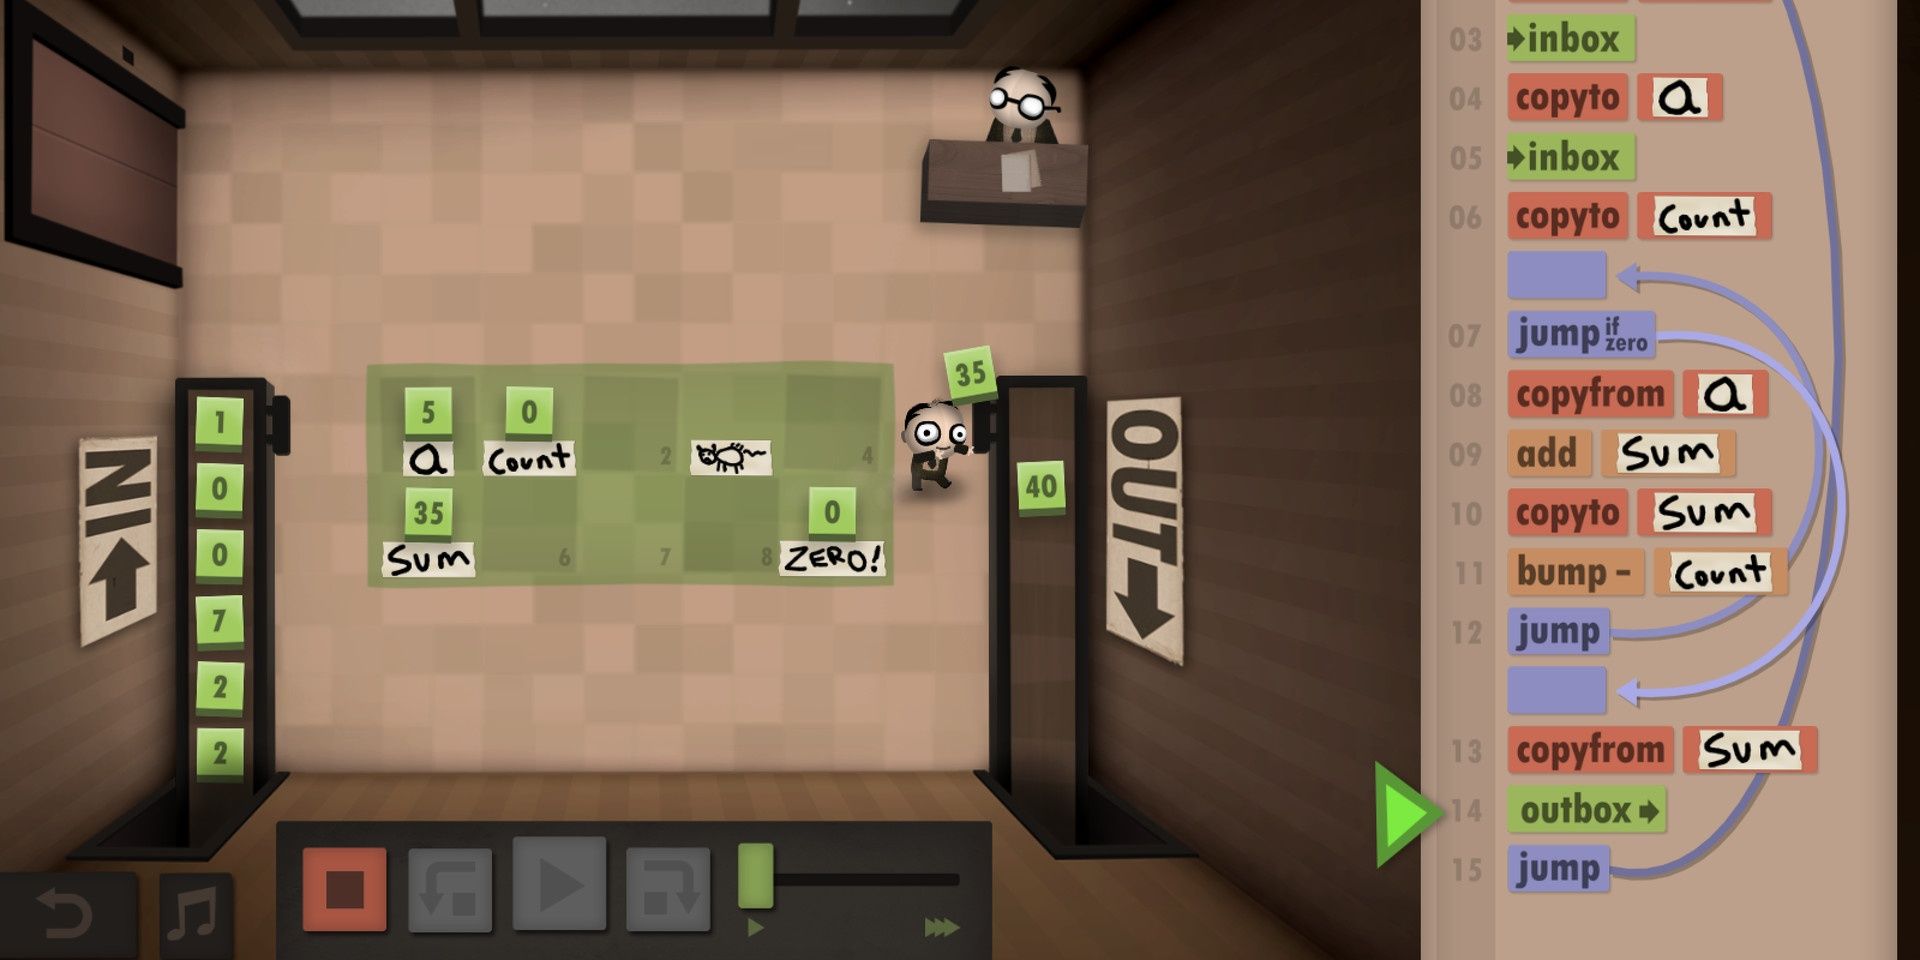 A top-down view of an office space. One human is sitting at at desk on the upper right corner, and another is next to the conveyor belt to the right.A green grid is on the floor. On the right of the image is a series of instructions. Image credit: store.steampowered.com